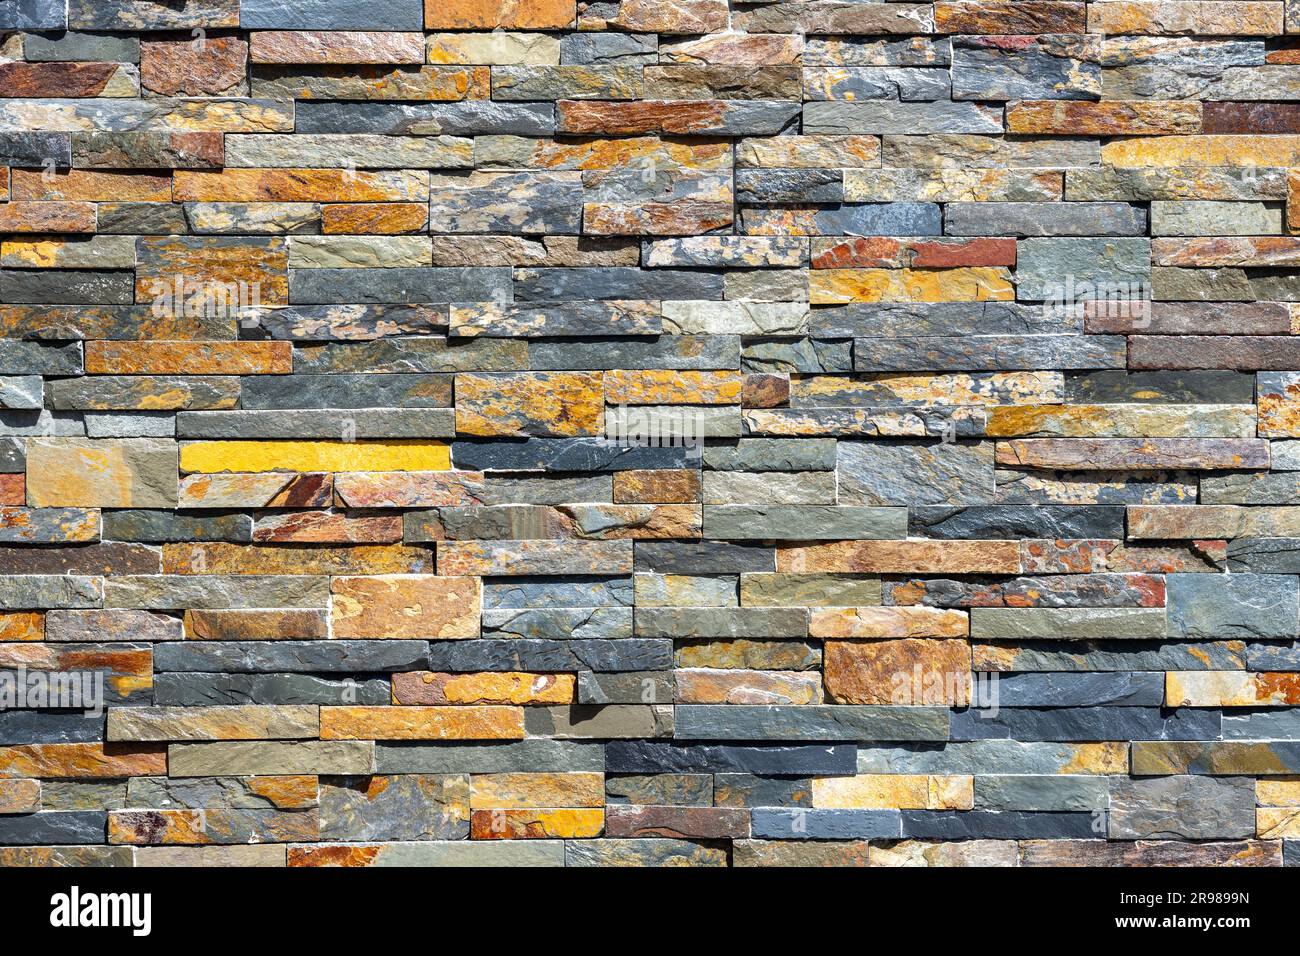 Background from a wall made of small stone tiles Stock Photo